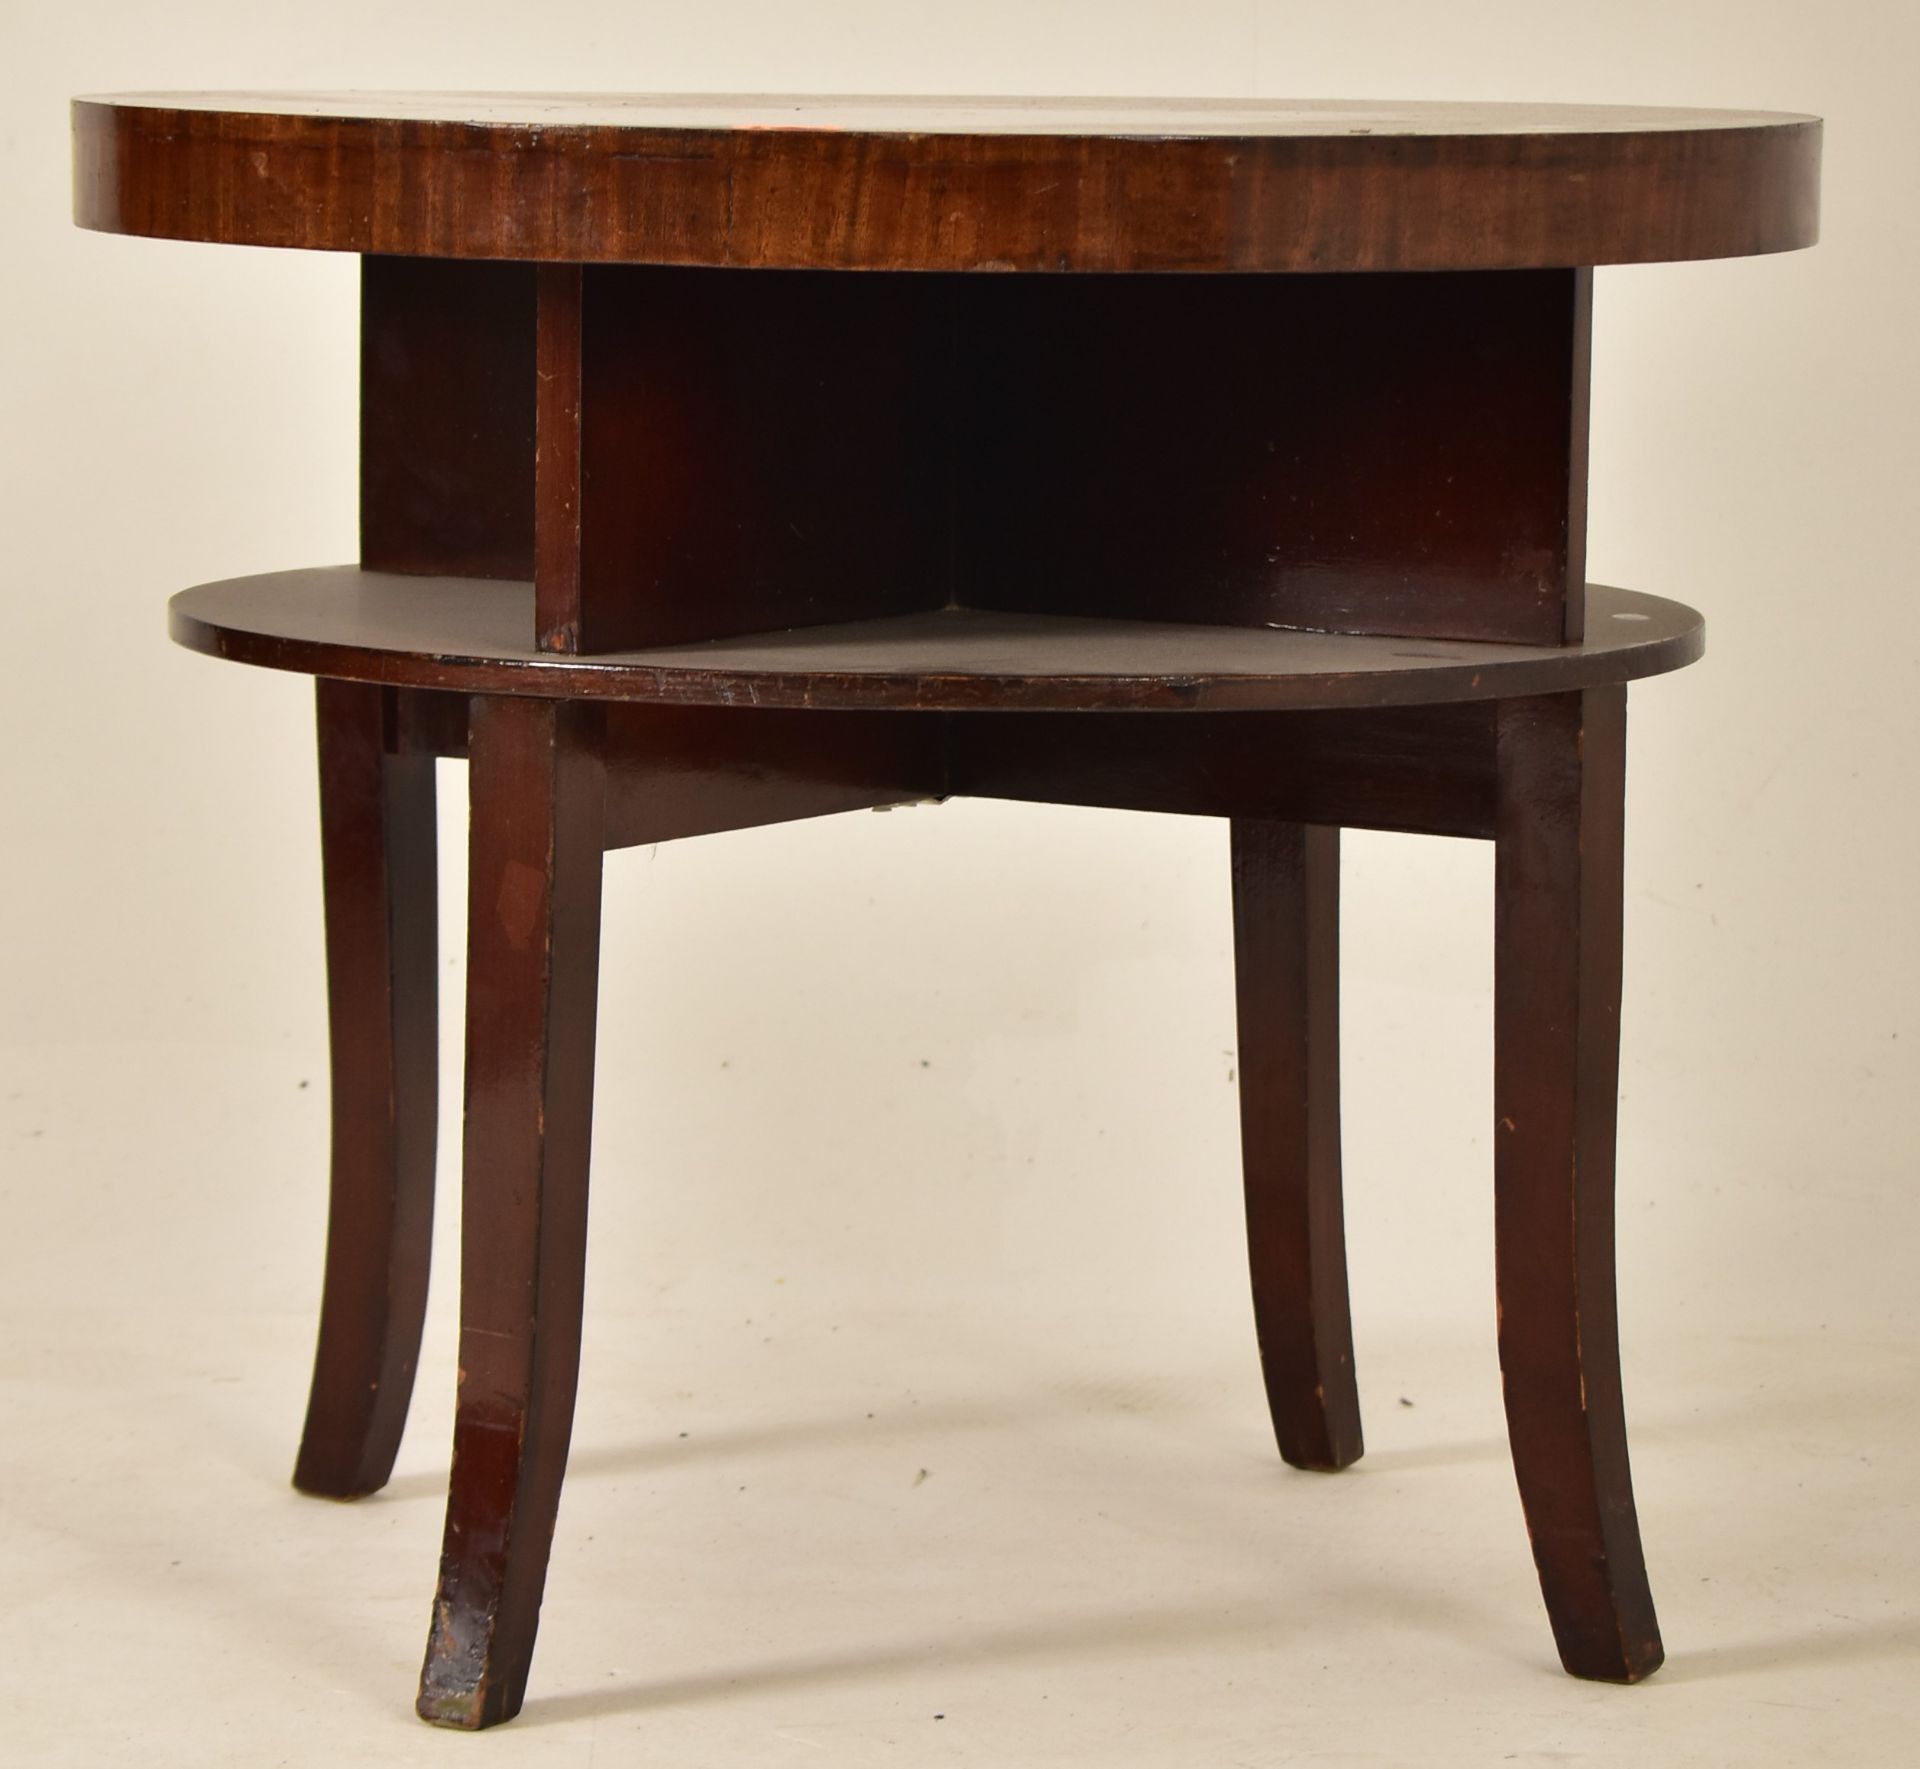 MID 20TH CENTURY WALNUT VENEERED LOW OCCASIONAL TABLE - Image 5 of 6